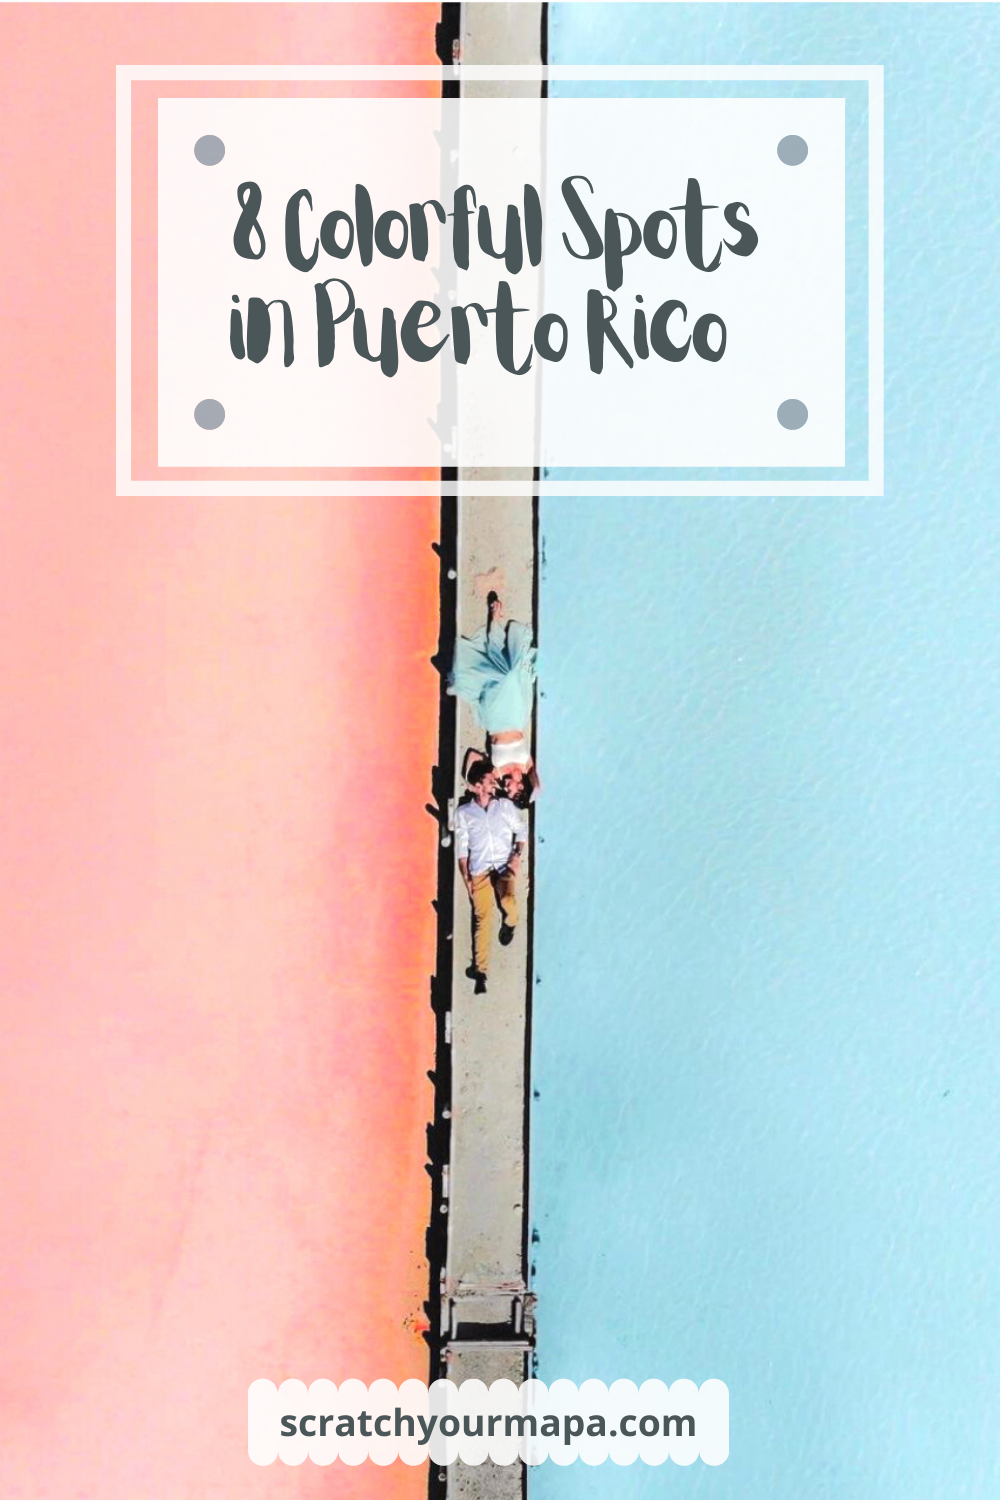 The Most Colorful Spots in Puerto Rico Pin